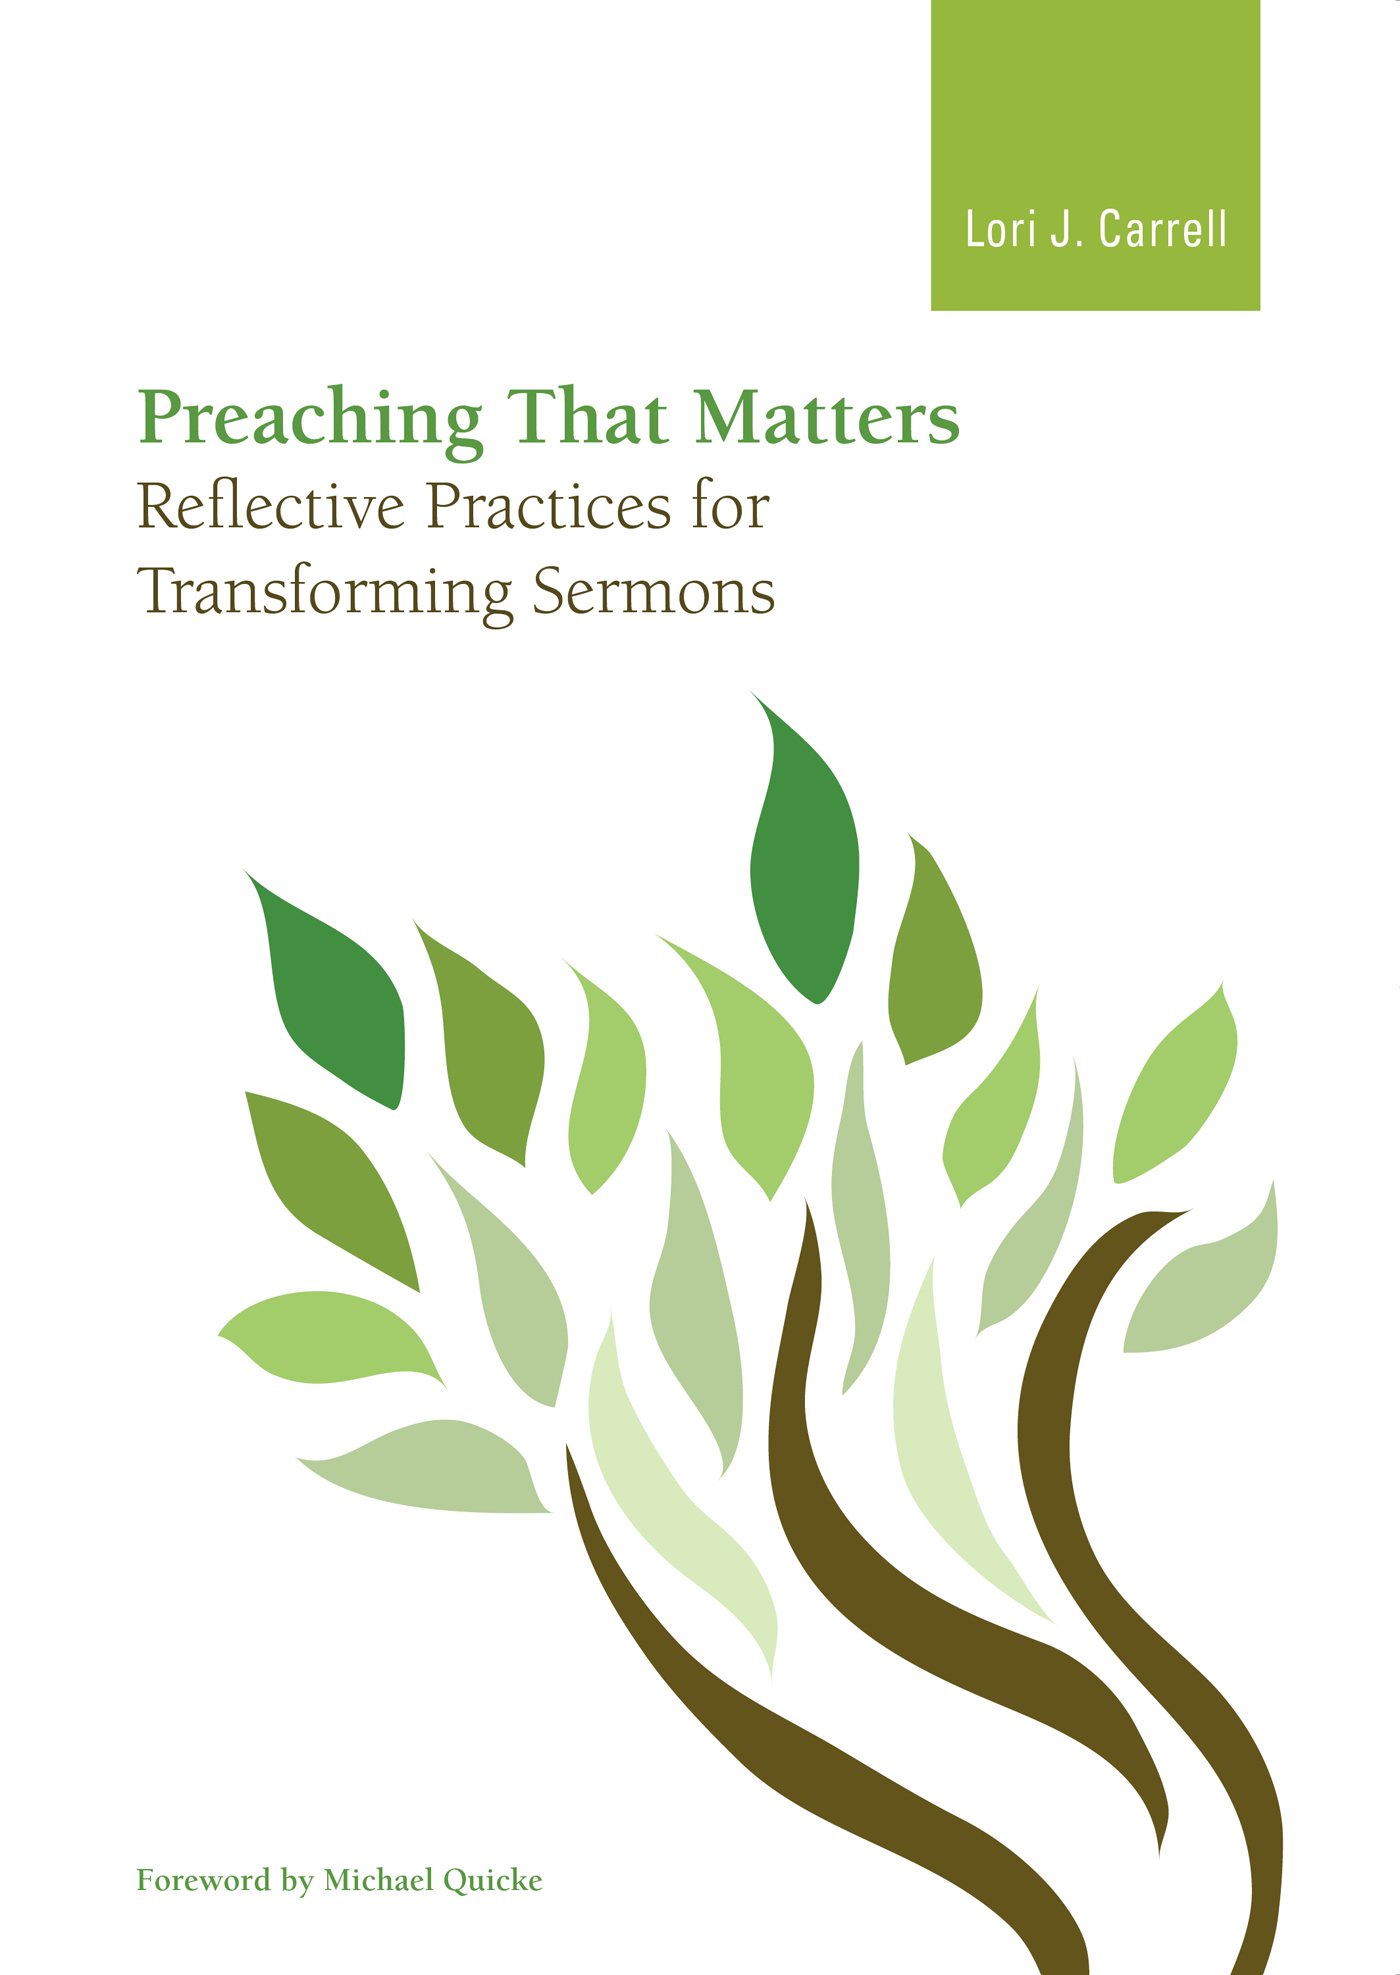 Preaching that Matters: Reflective Practices for Transforming Sermons